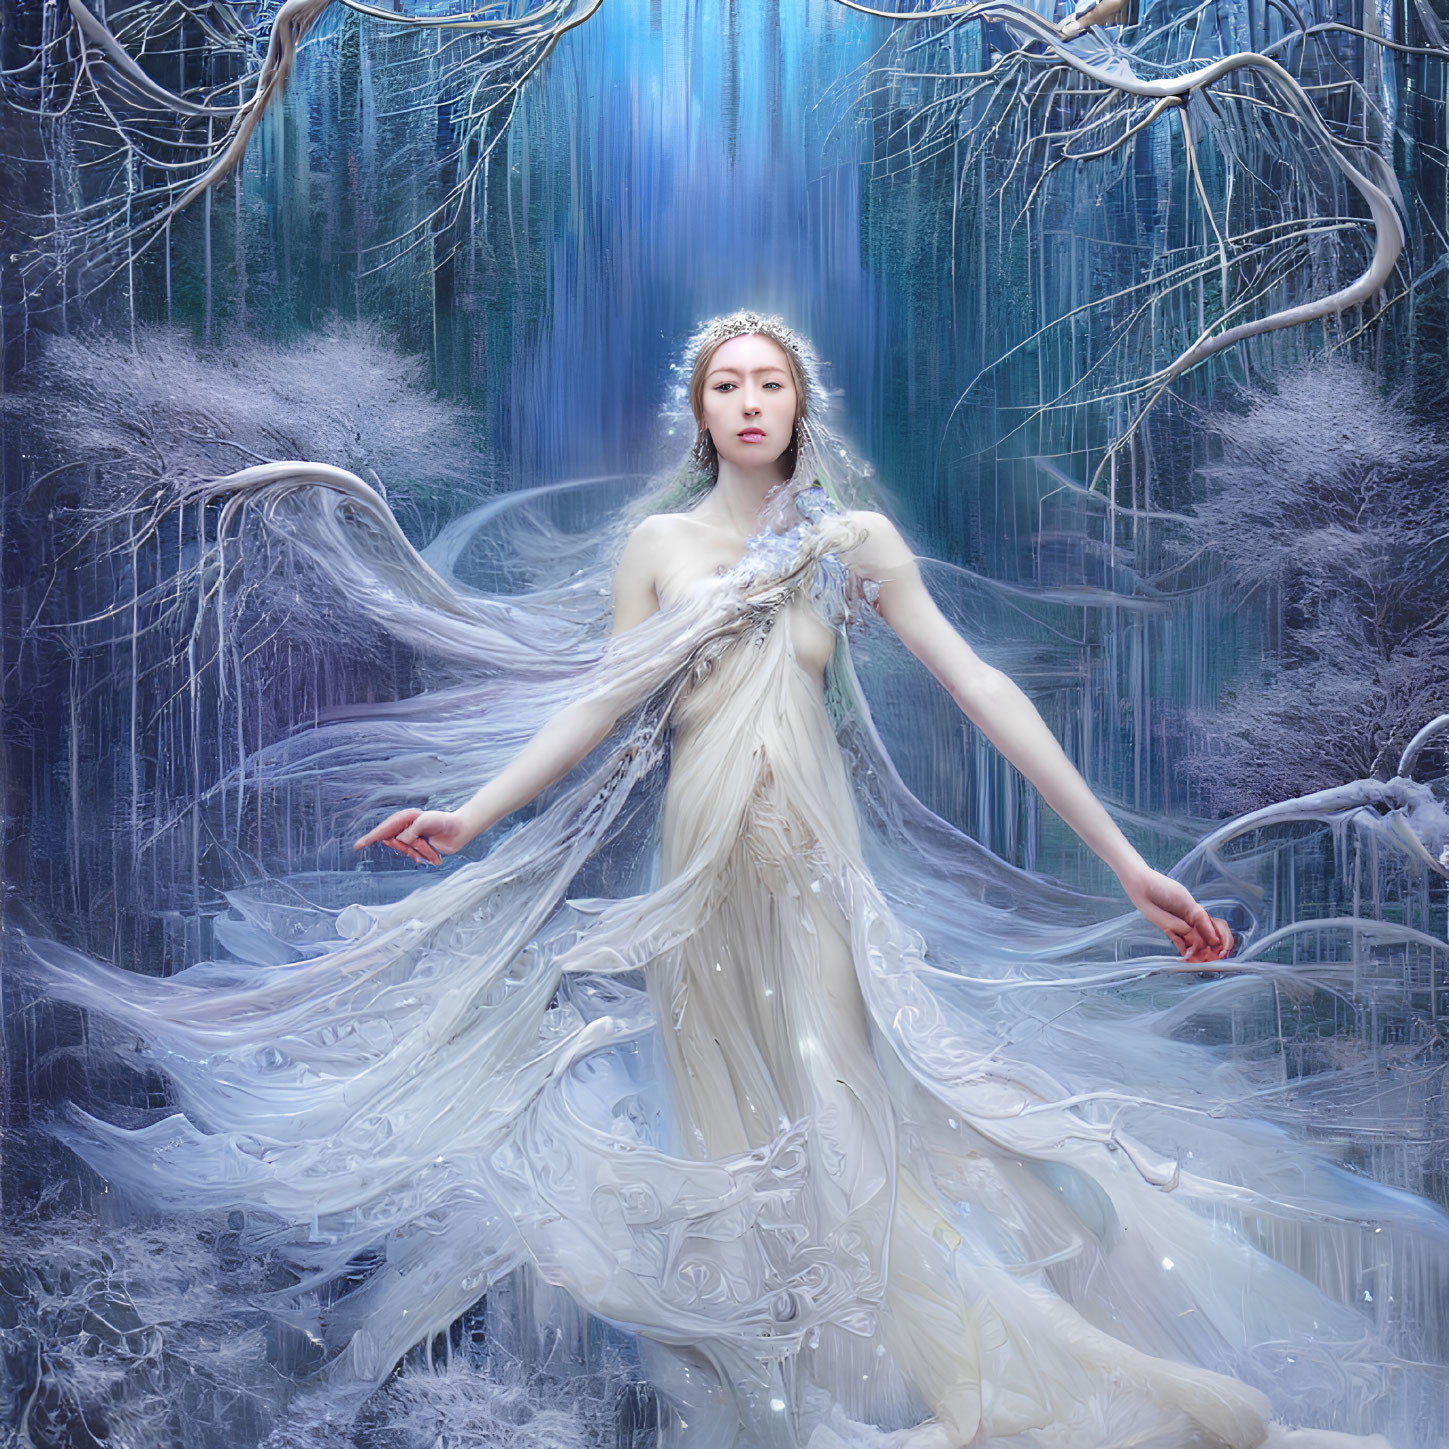 Woman in flowing white gown in mystical icy forest with bare branches and soft blue glow